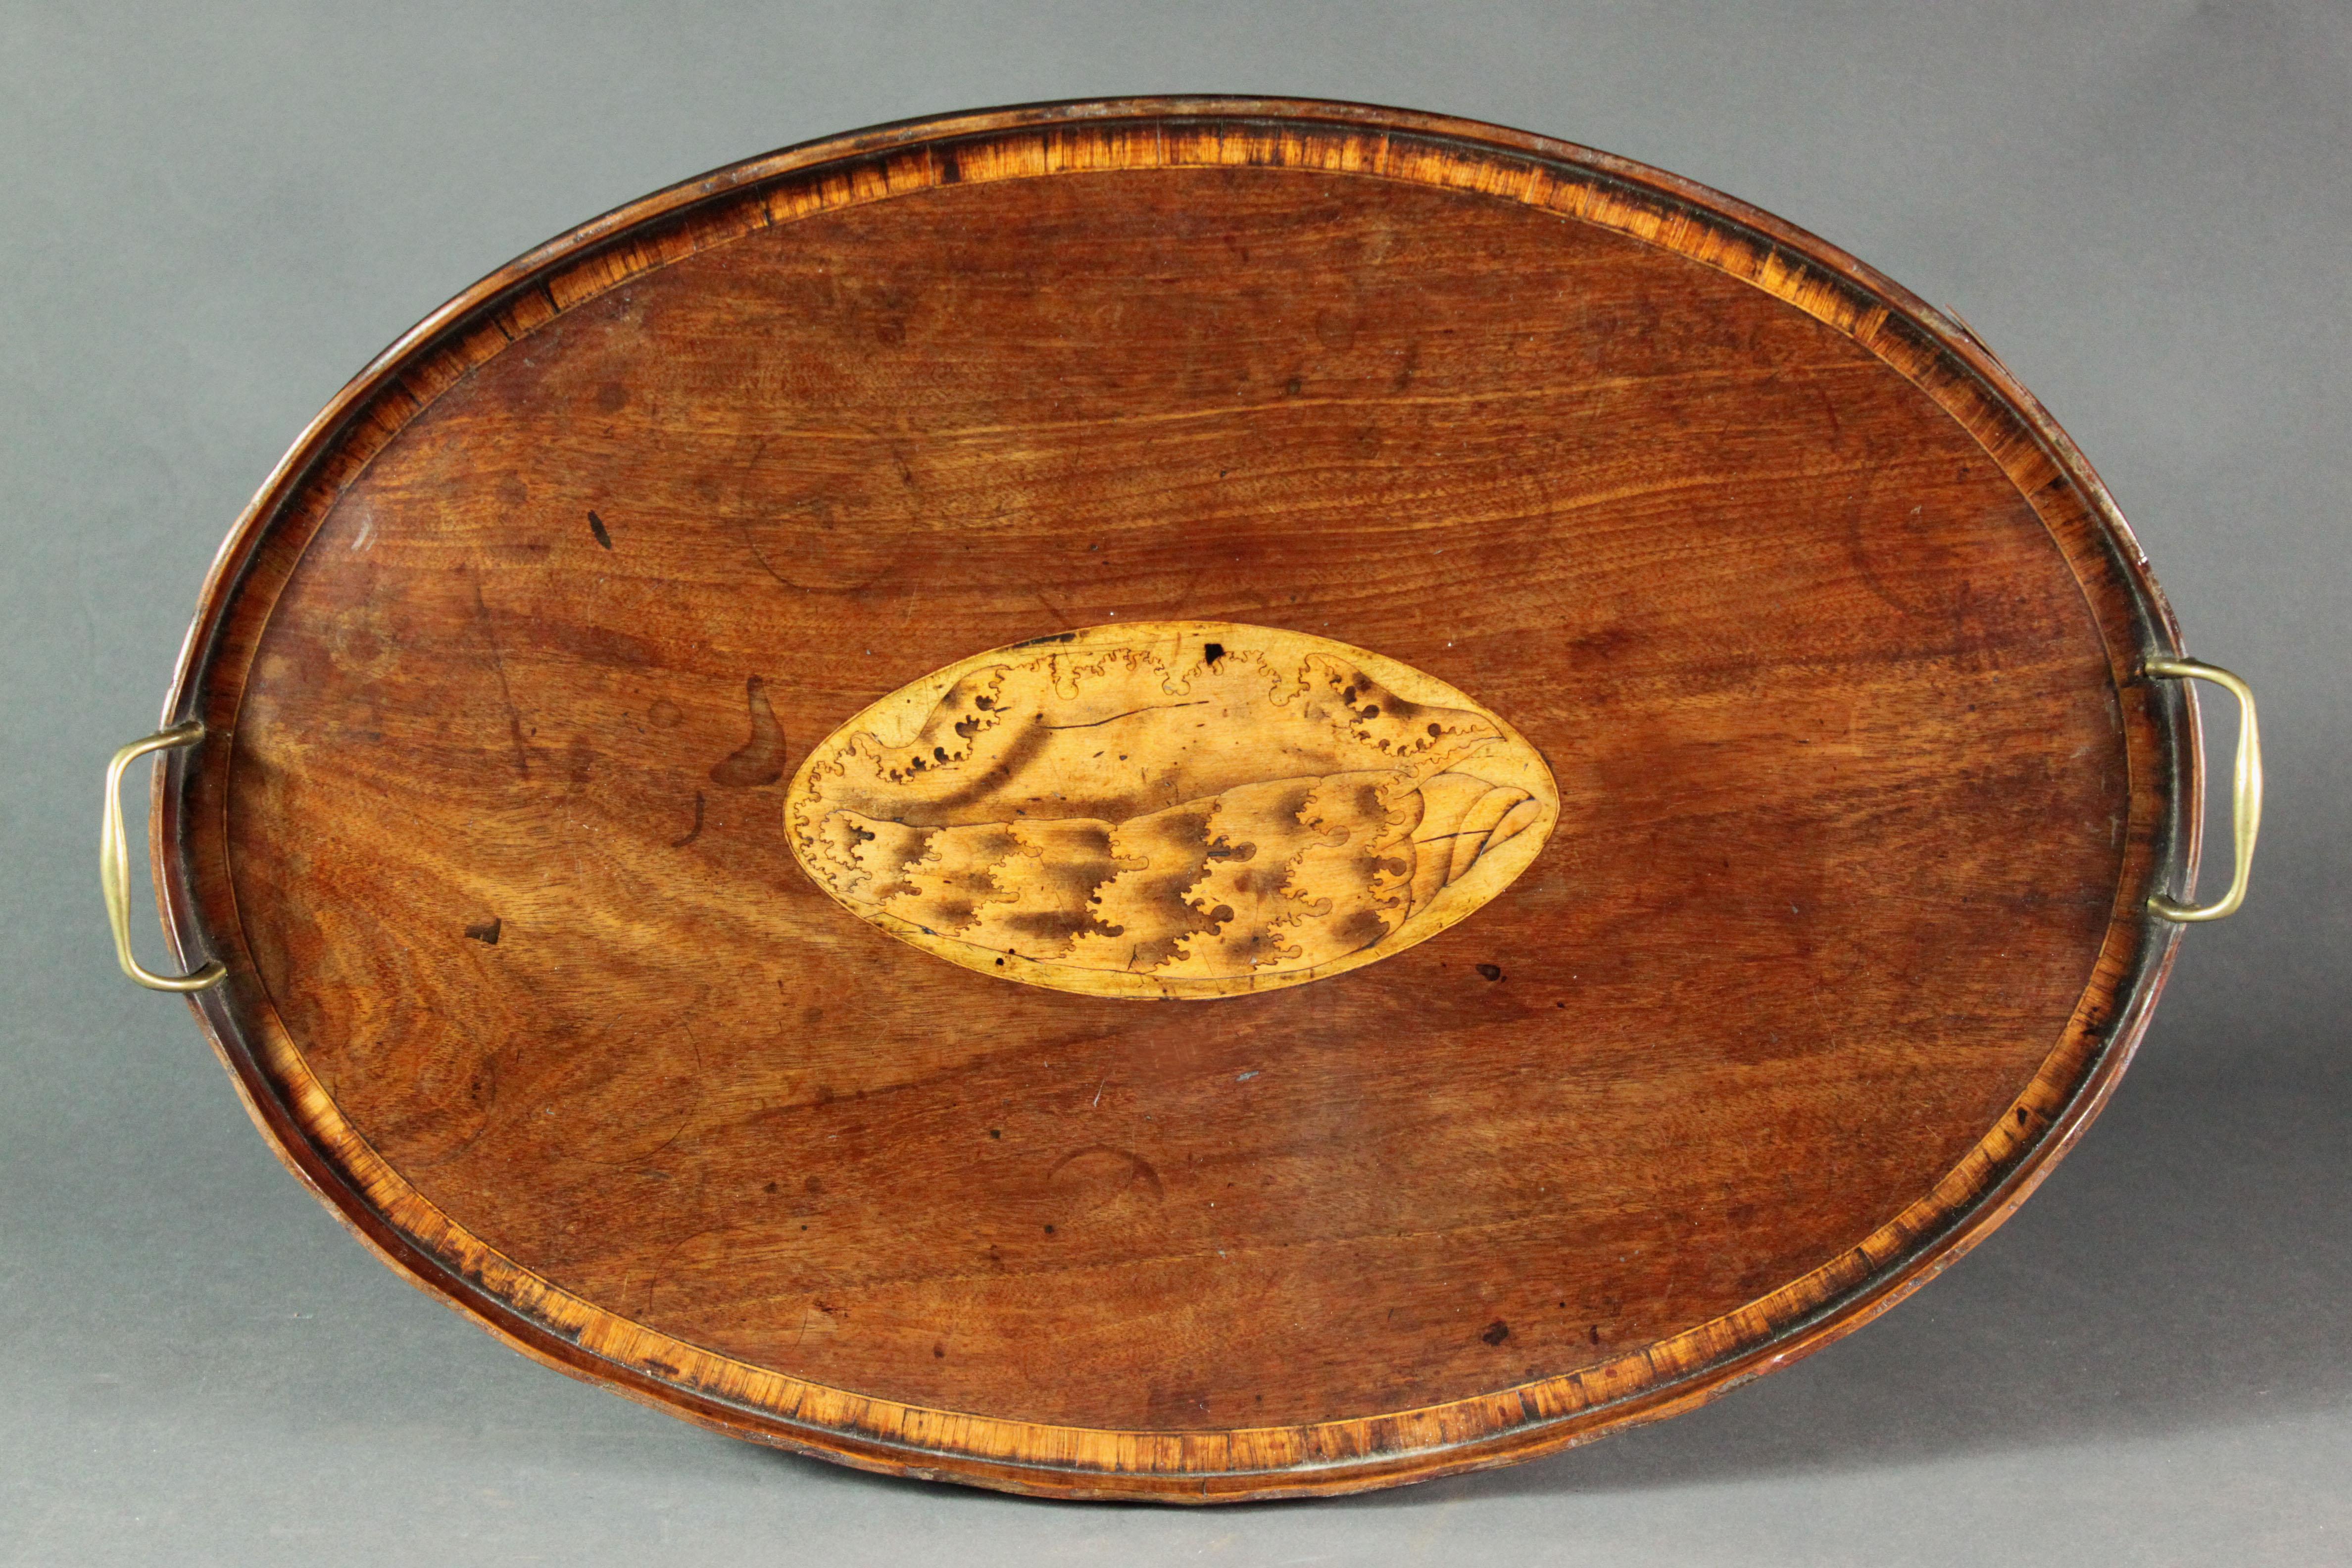 A fine George II Sheraton period oval try in figured mahogany of a good colour and patina with kingwood cross-banding, attractive shell inlay to centre, original brass handles. Note the laminated gallery ~ Georgian trays usually have this feature.